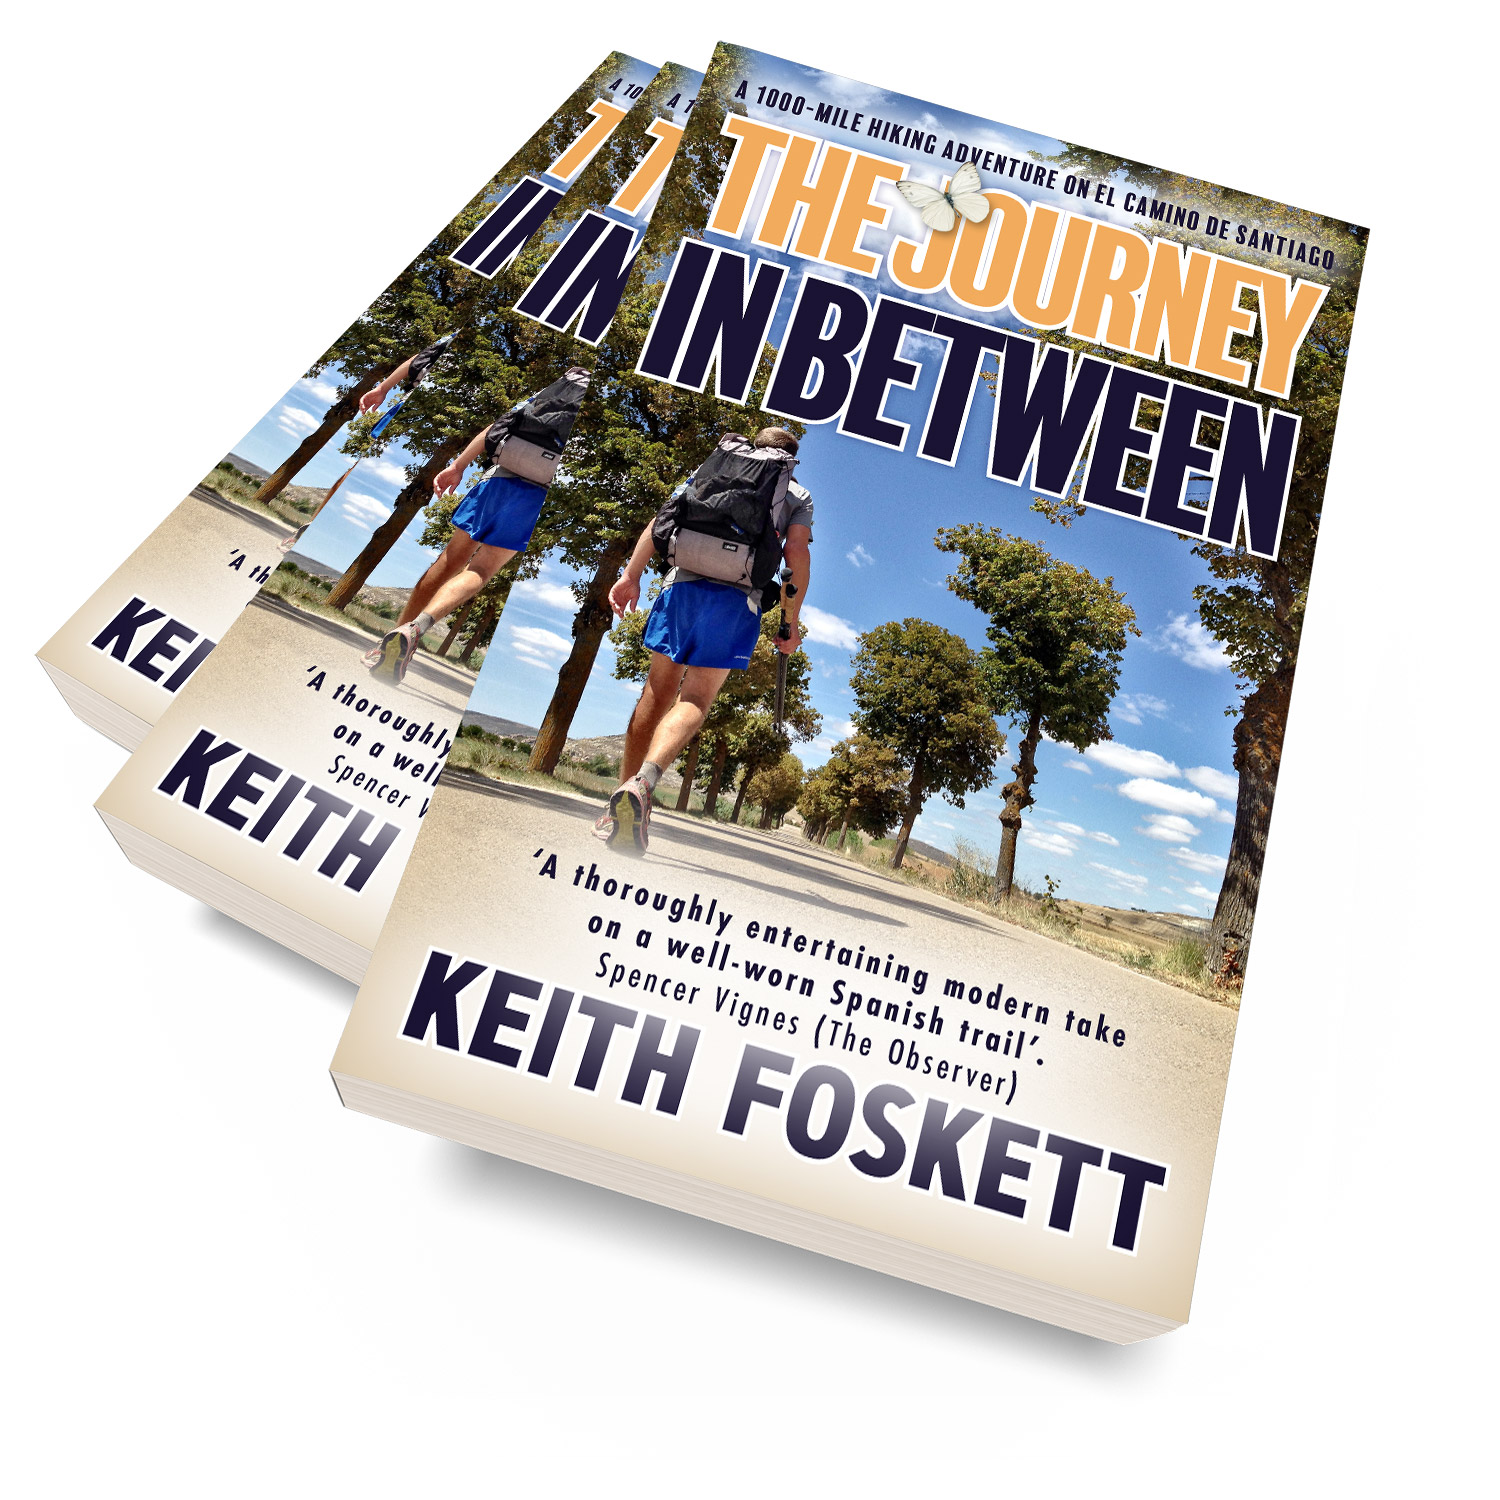 'The Journey In Between' is an excellent hiking memoir, about one man's trek along the El Camino De Santiago. The author is Keith Foskett. The book cover was designed by Mark Thomas, of coverness.com. To find out more about my book design services, please visit www.coverness.com.